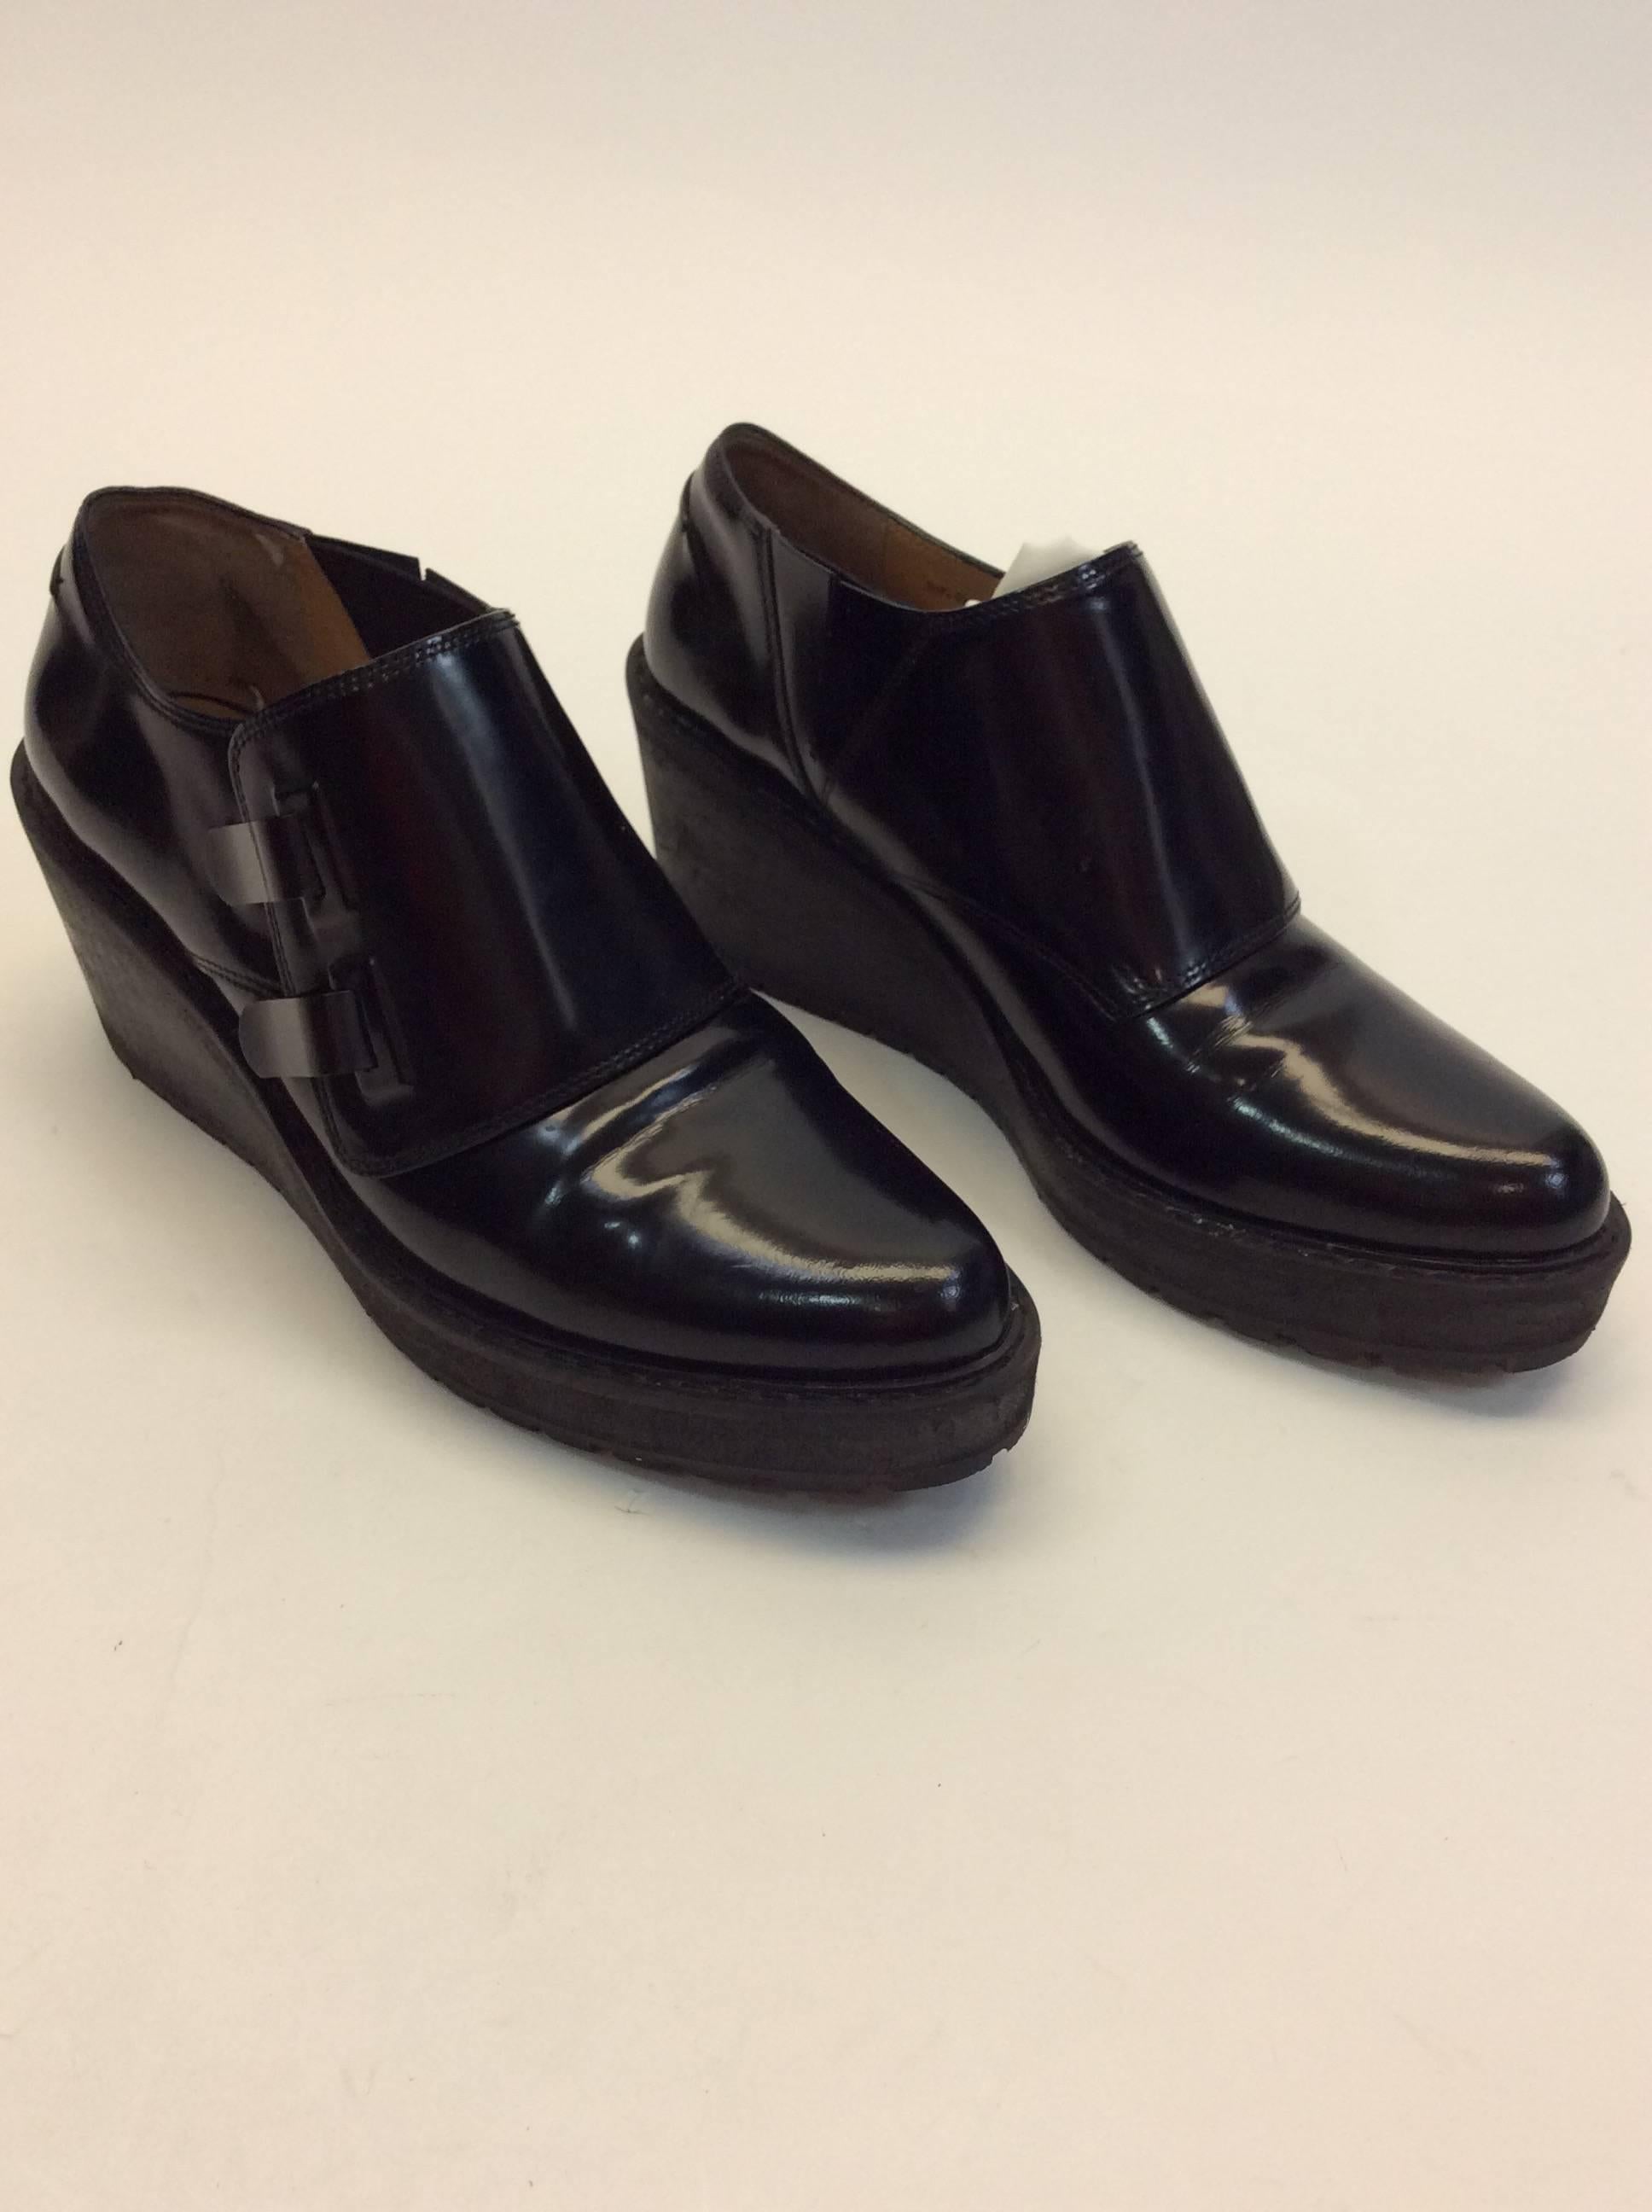 Phillip Lim Black Patent Loafer Wedge In Excellent Condition For Sale In Narberth, PA